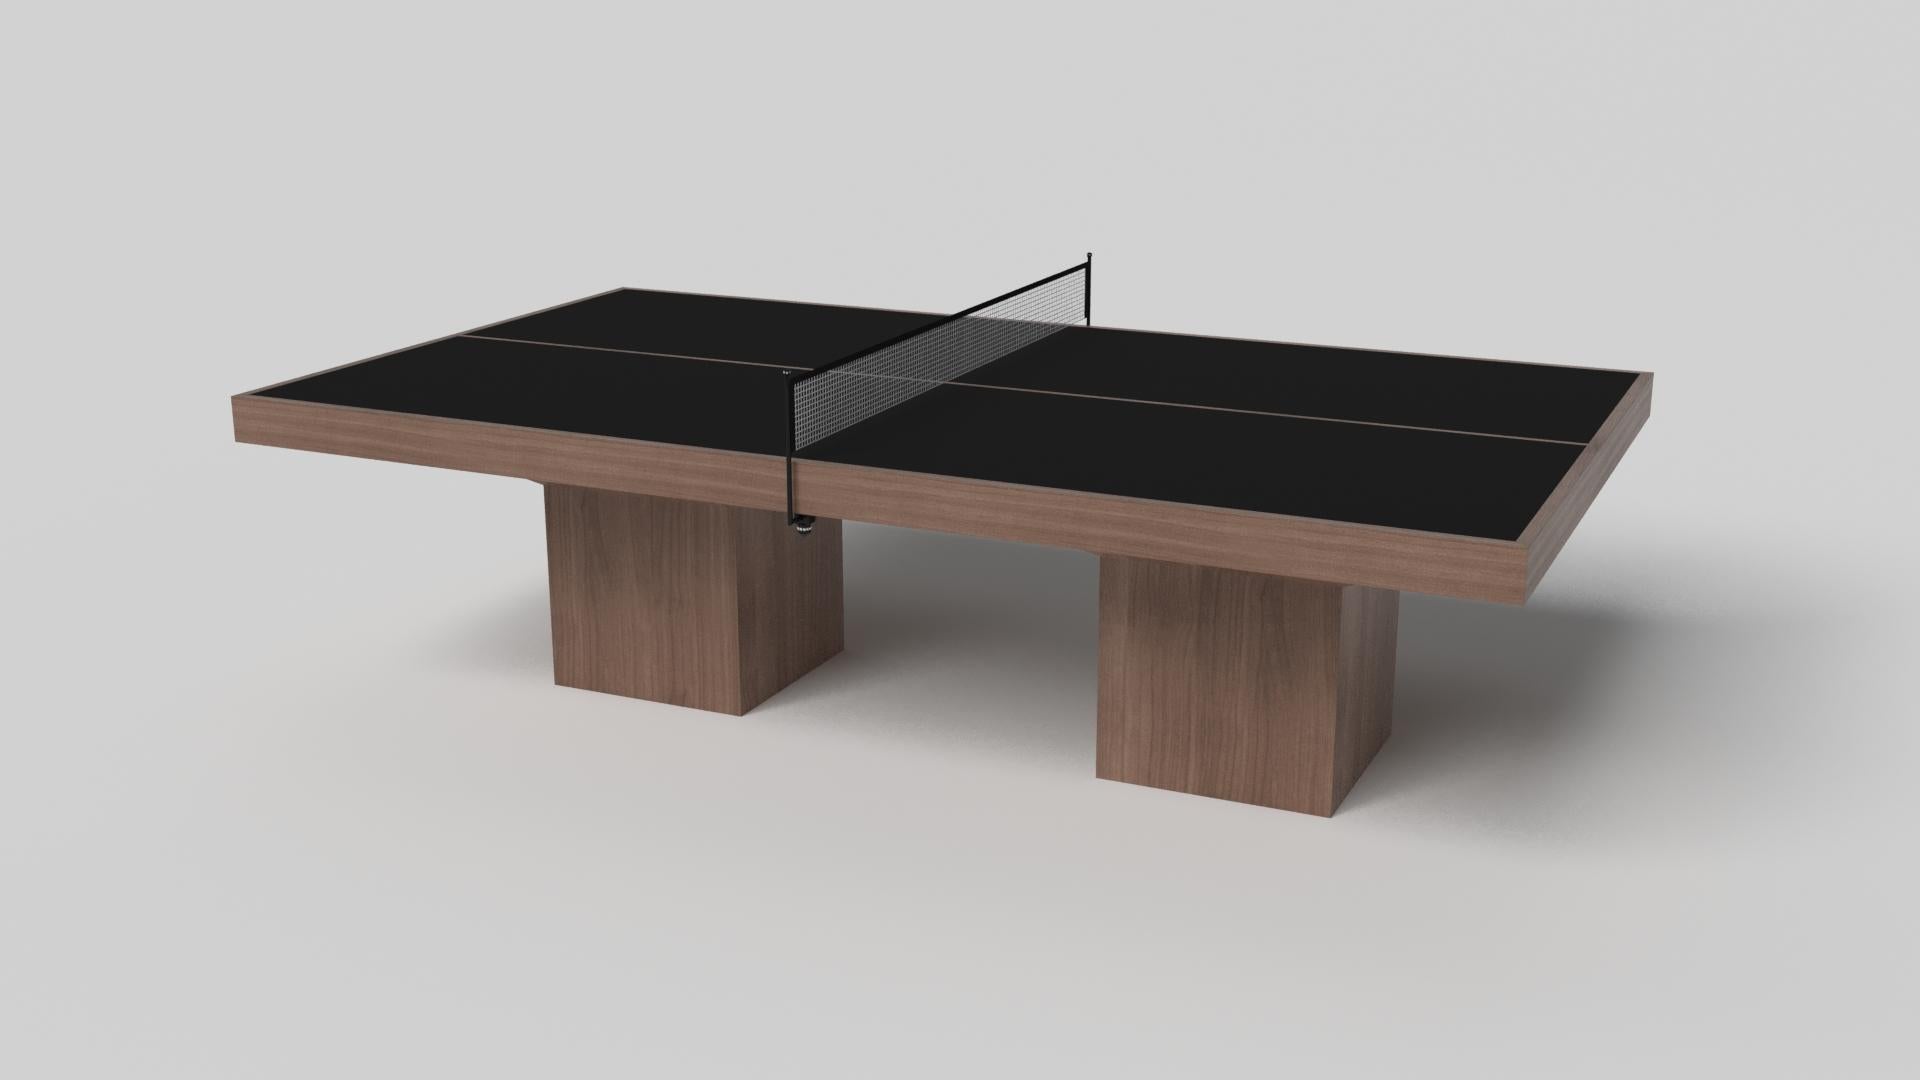 Minimalist design meets opulent elegance in the Trestle table tennis table. Detailed with a professional surface for endless game play, this contemporary table is expertly crafted. Square block legs give it a stark, geometric look that contributes